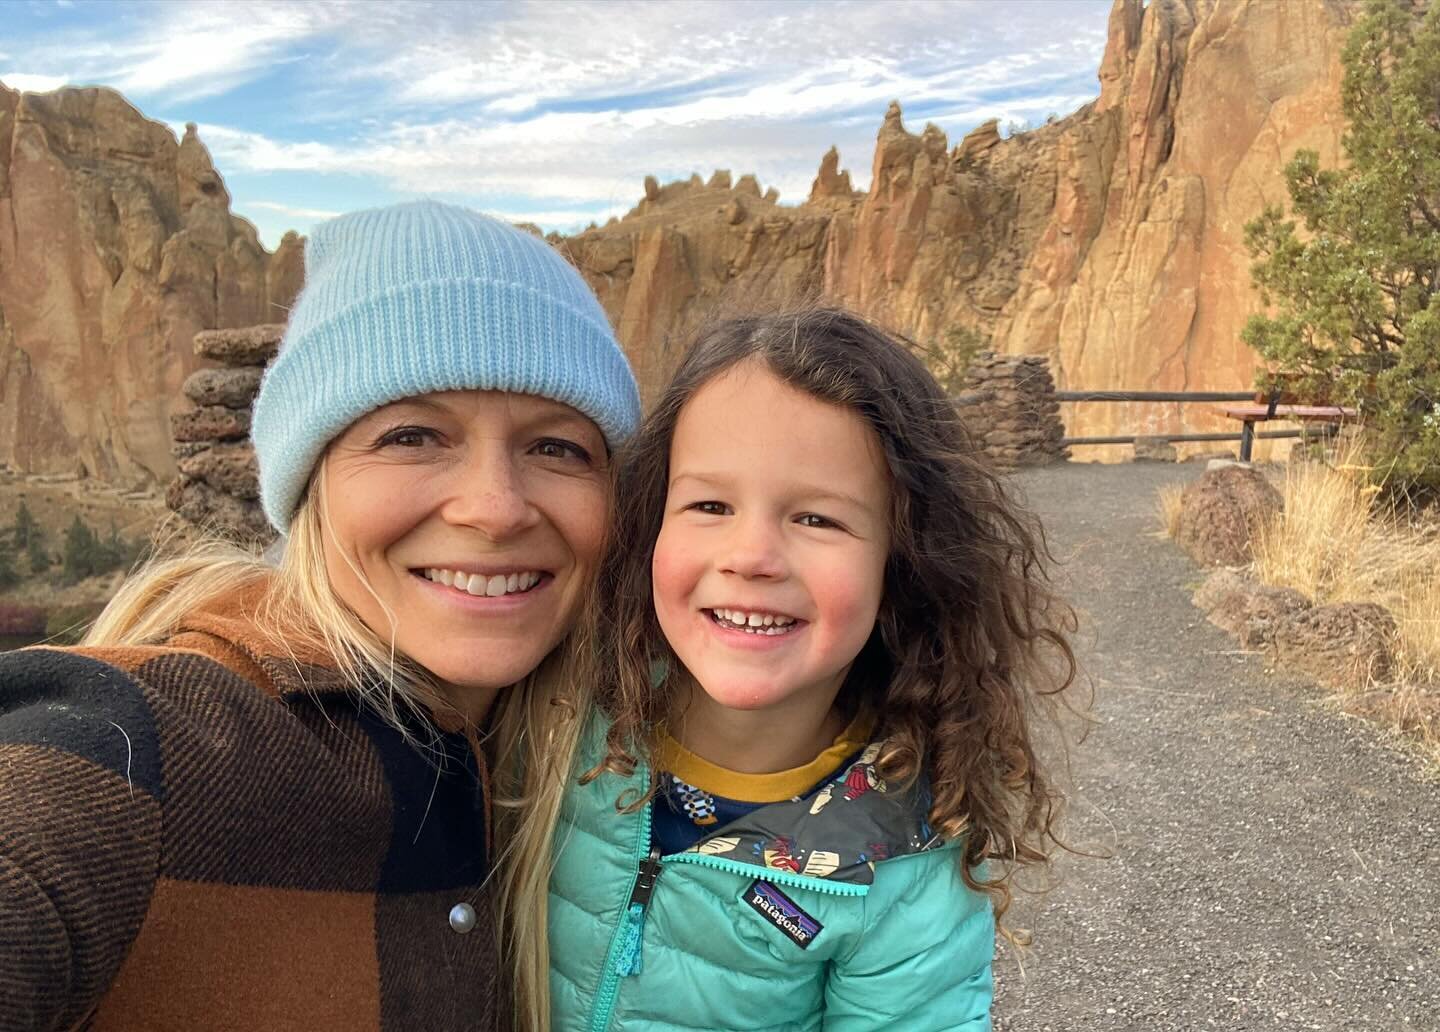 Recap with my little. It&rsquo;s been a year of growth and learning to be a better mama, artist, friend, partner, sister, daughter, human.

Looking forward to more growth, discipline, creativity, kindness, and adventure in 2024. 

Love to you all. ❤️